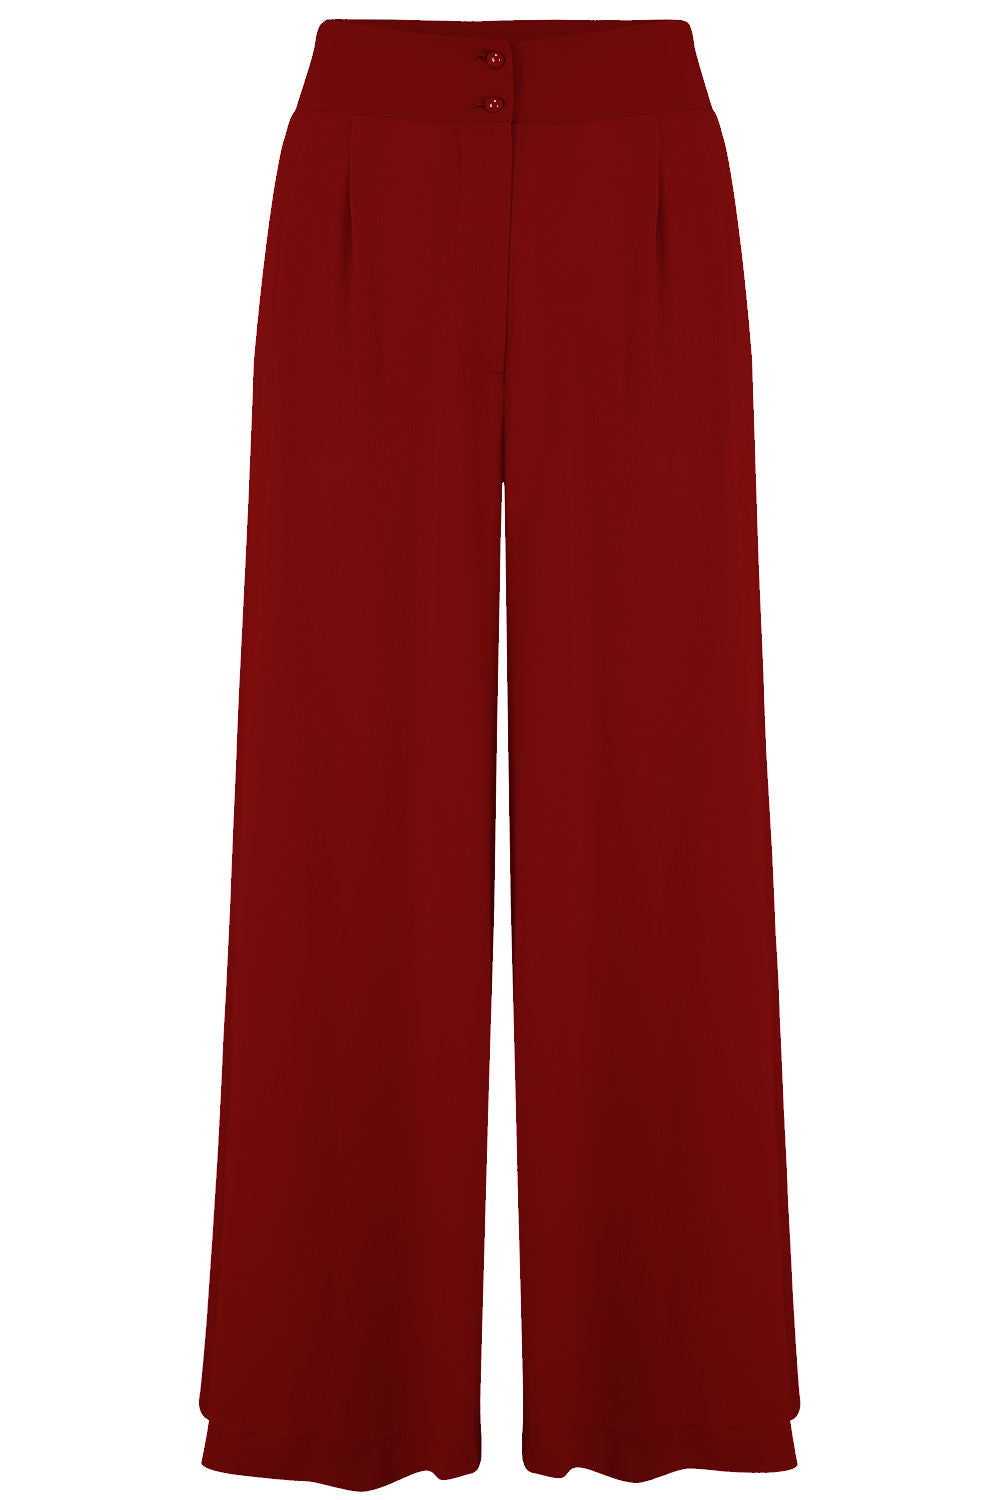 The "Sophia" Palazzo Wide Leg Trousers in Wine, Easy To Wear Vintage Inspired Style - True and authentic vintage style clothing, inspired by the Classic styles of CC41 , WW2 and the fun 1950s RocknRoll era, for everyday wear plus events like Goodwood Revival, Twinwood Festival and Viva Las Vegas Rockabilly Weekend Rock n Romance Rock n Romance